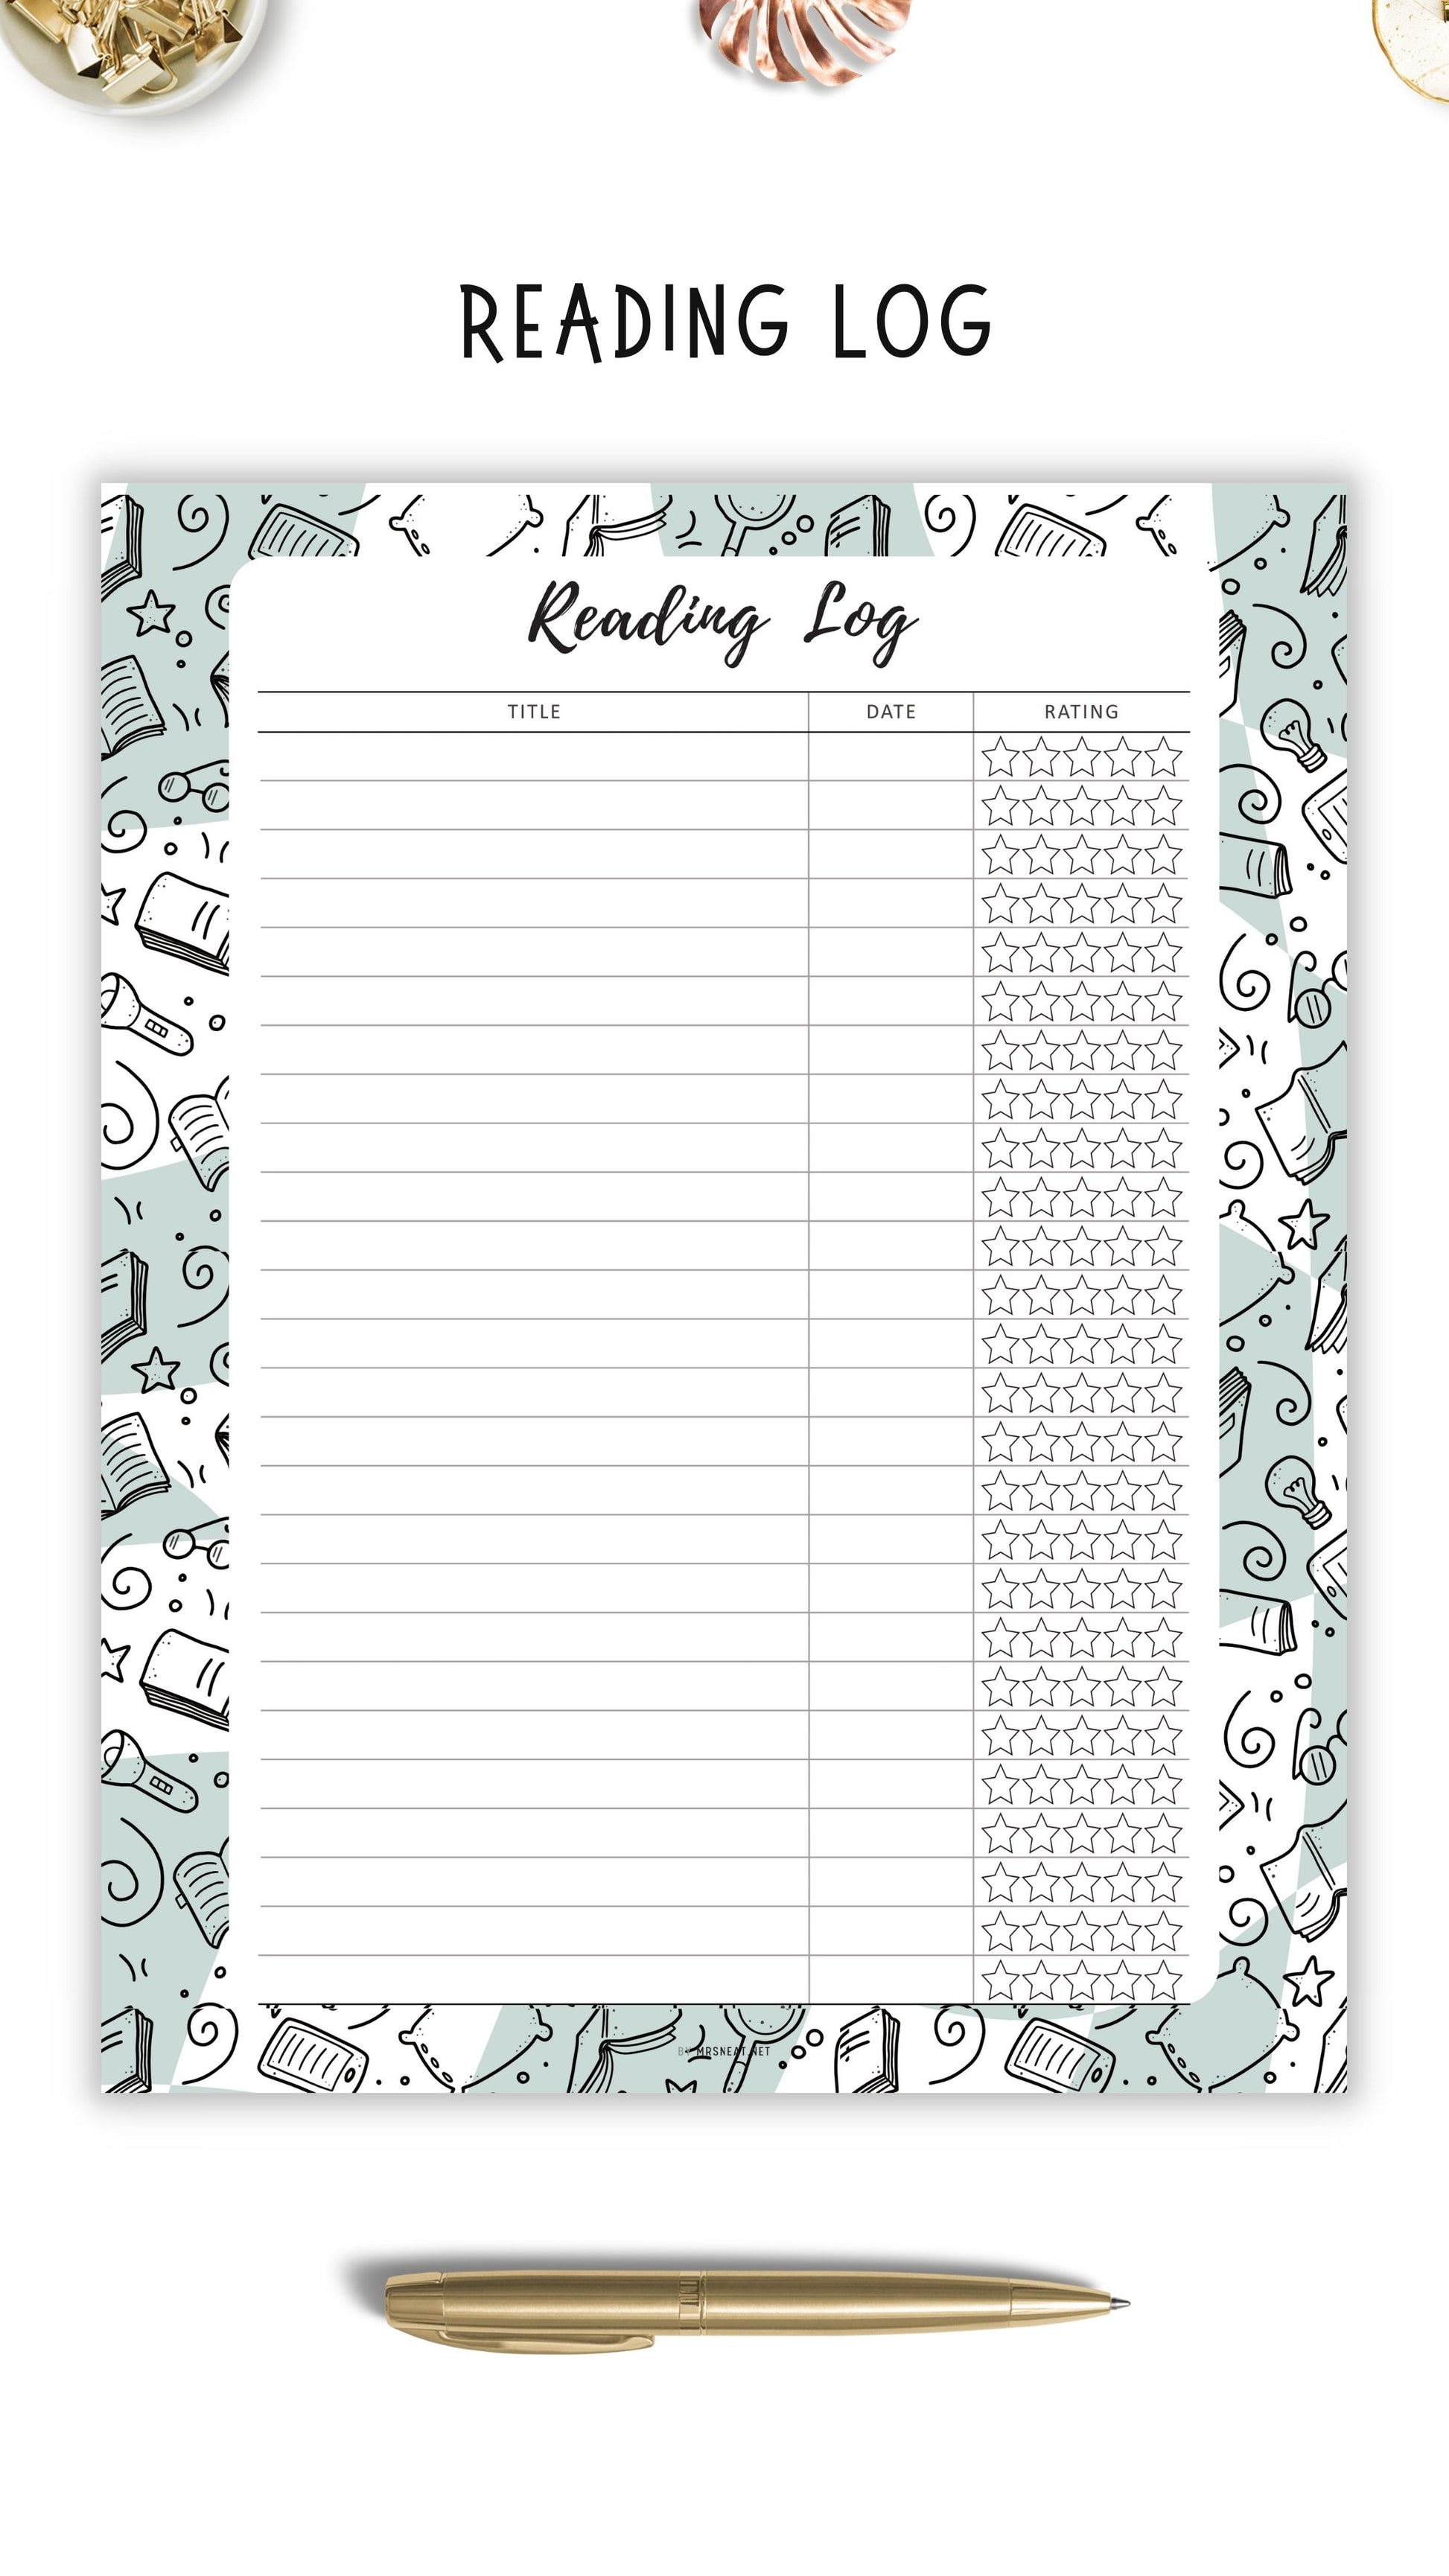 Reading Log Template Printable, 5 colors ; Peach, Green, Blue, Pink, Neutral, 4 sizes ; A4, A5, Letter, Half Letter, Digital Planner